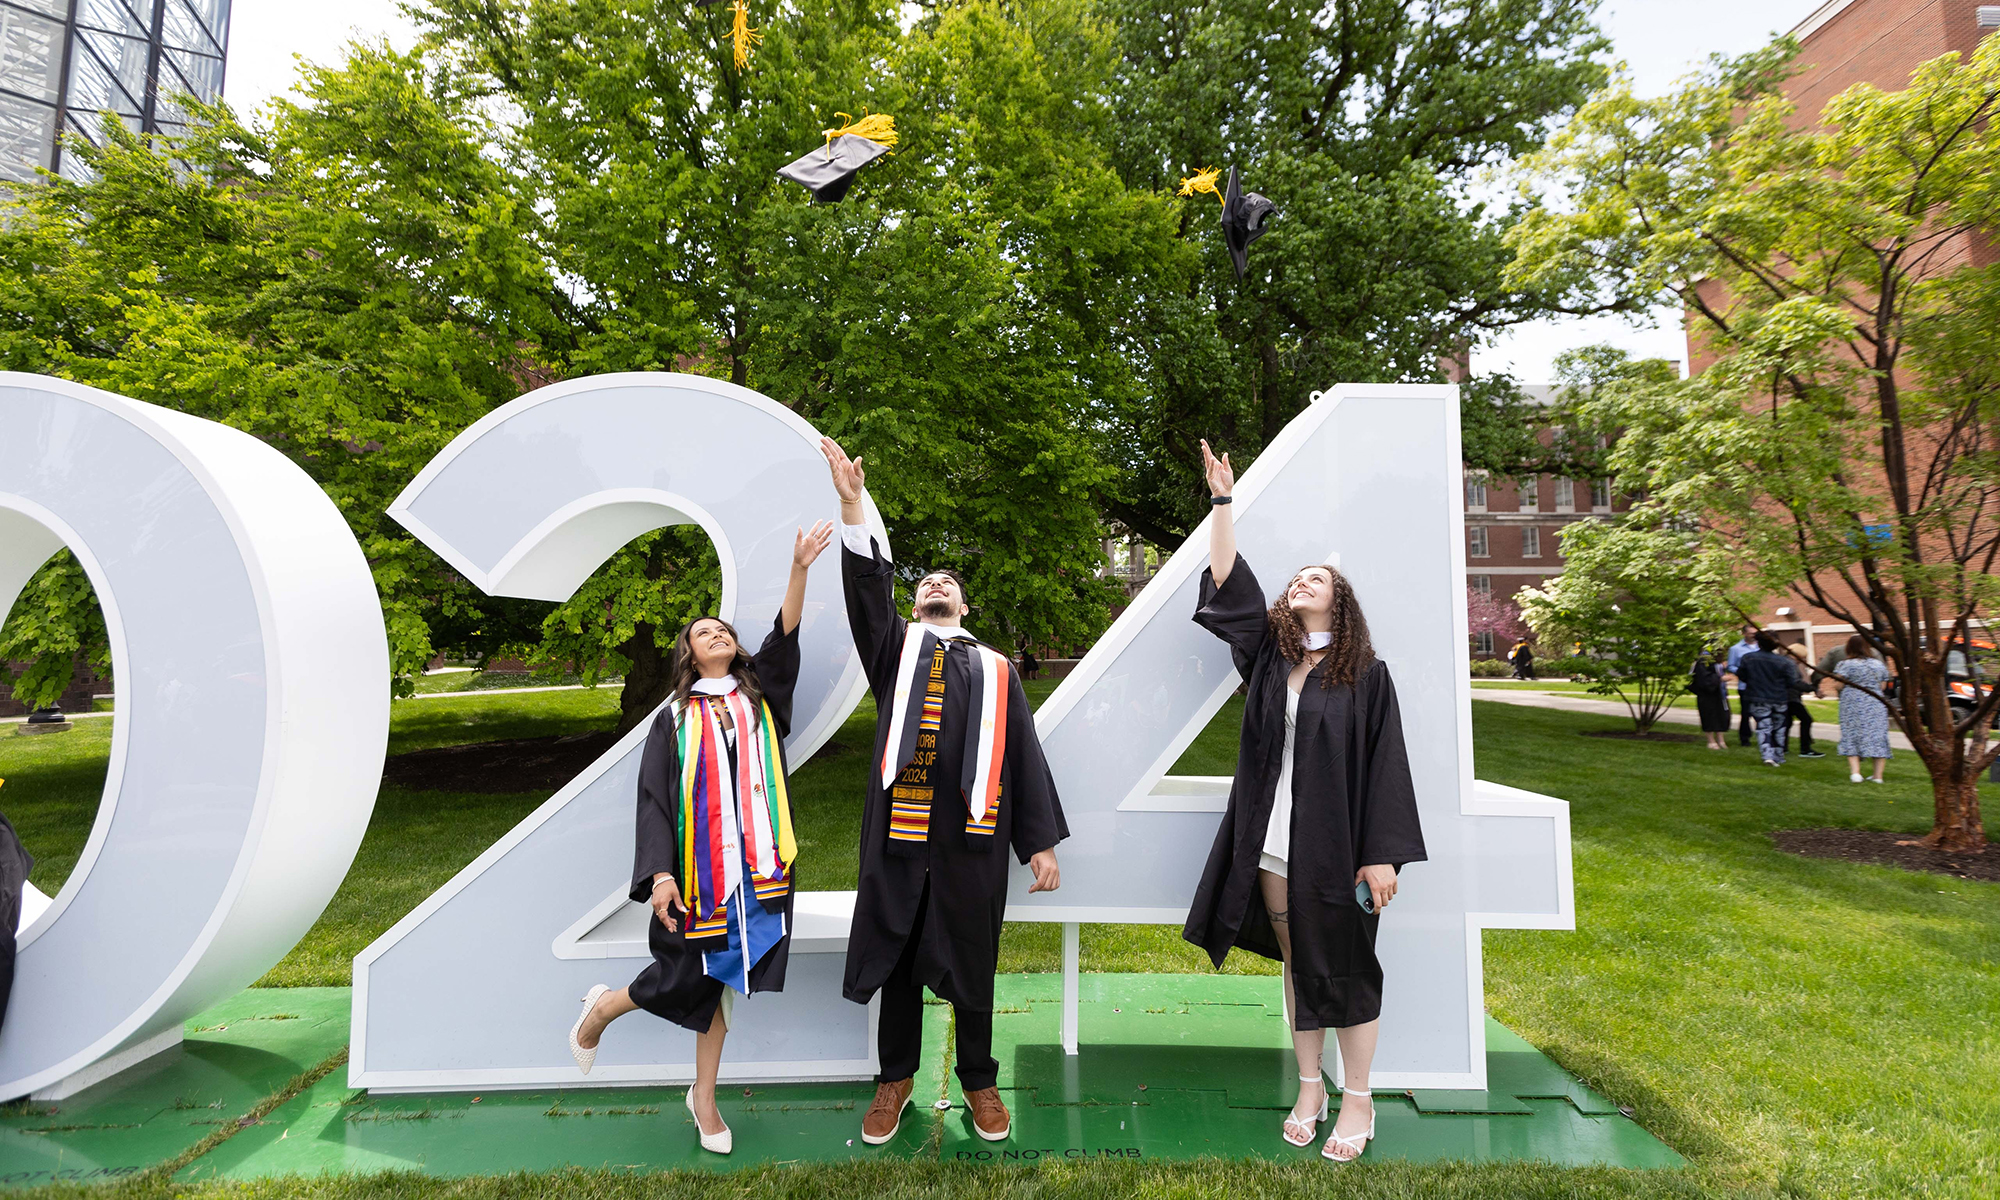 Three students throw caps in the air, standing in front of numbers 24 on quad.